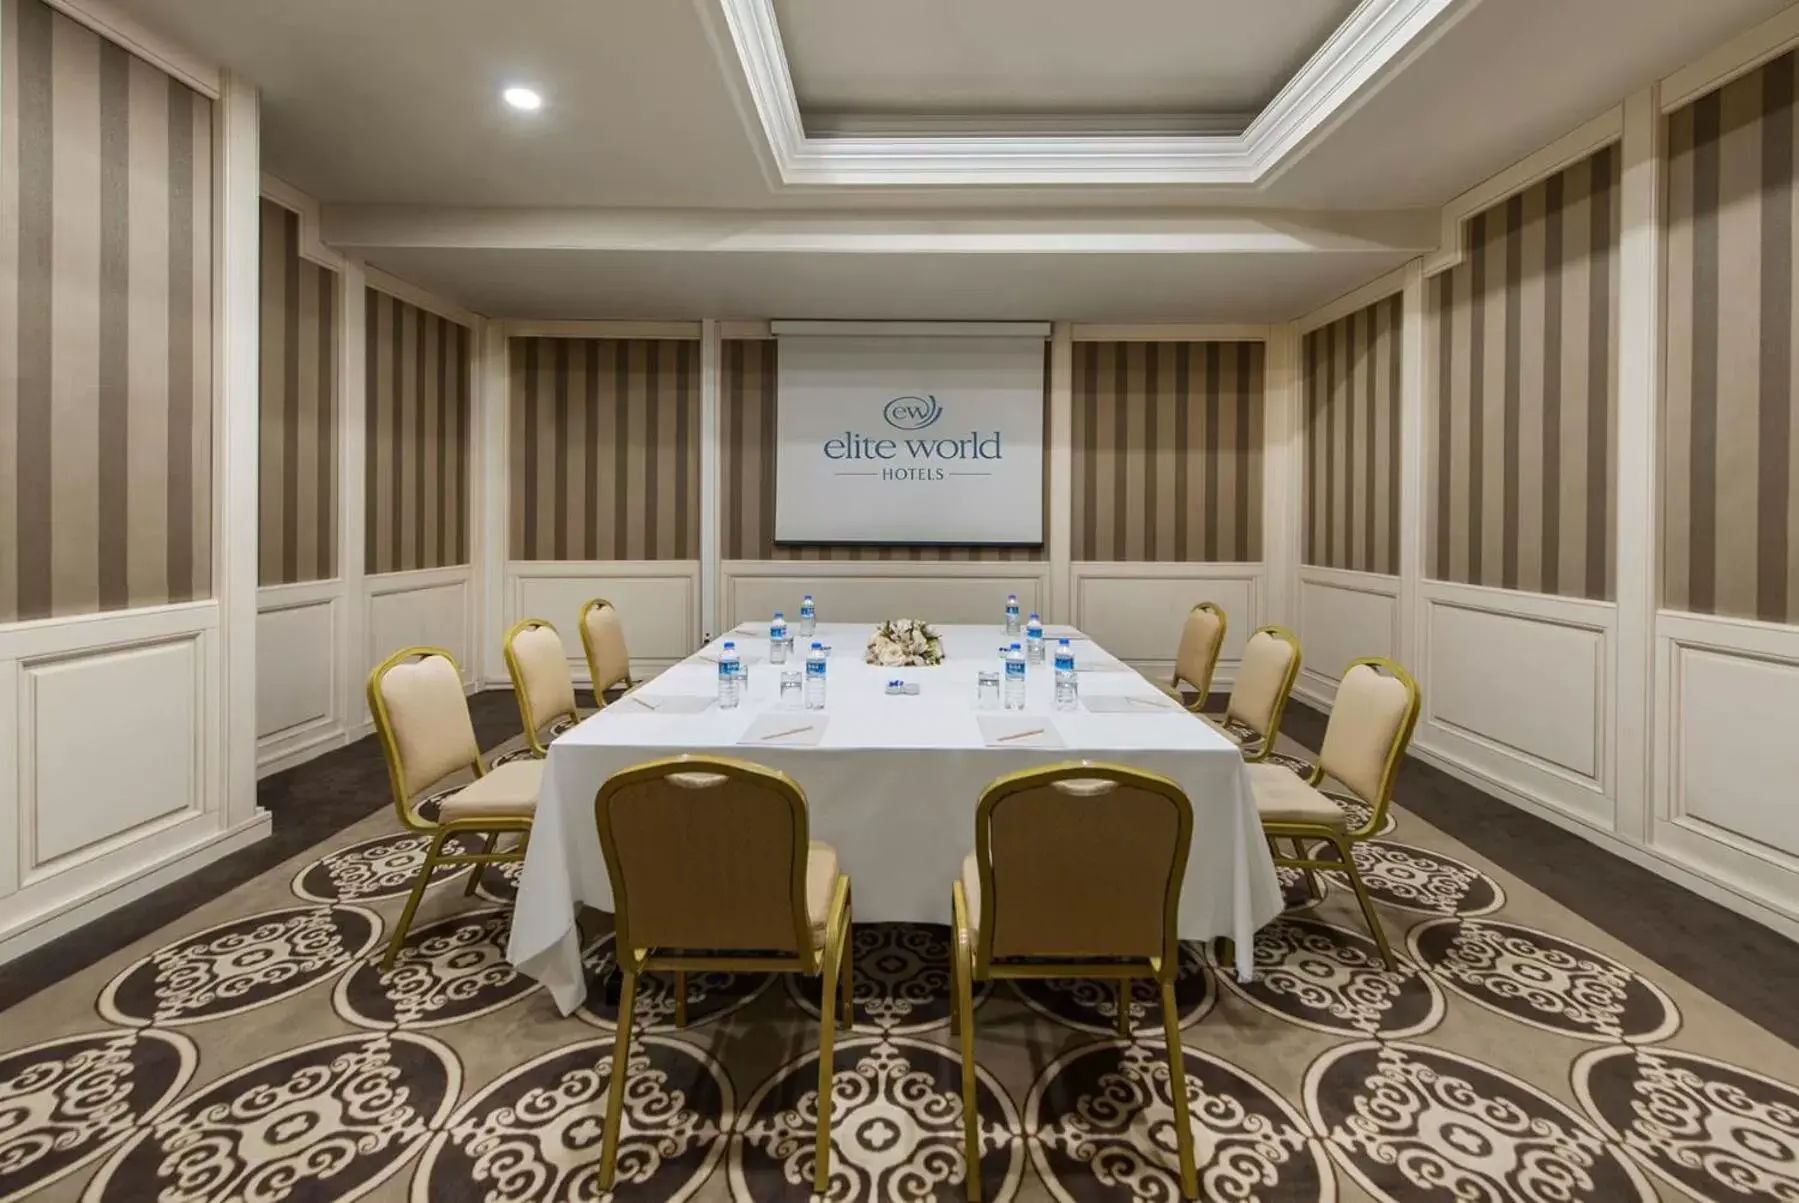 Meeting/conference room in Elite World Comfy Istanbul Taksim